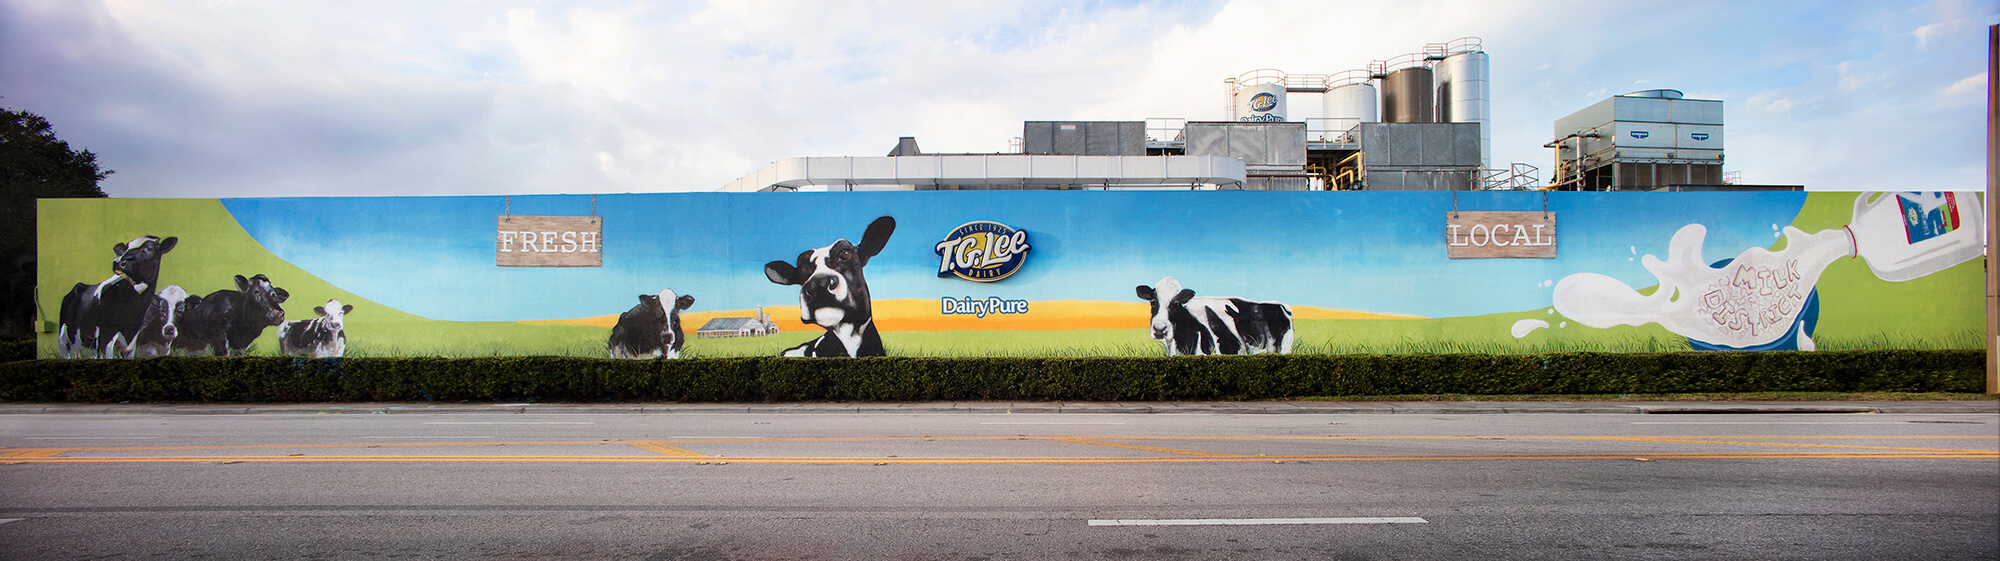 mural of cow on farm land on industrial building